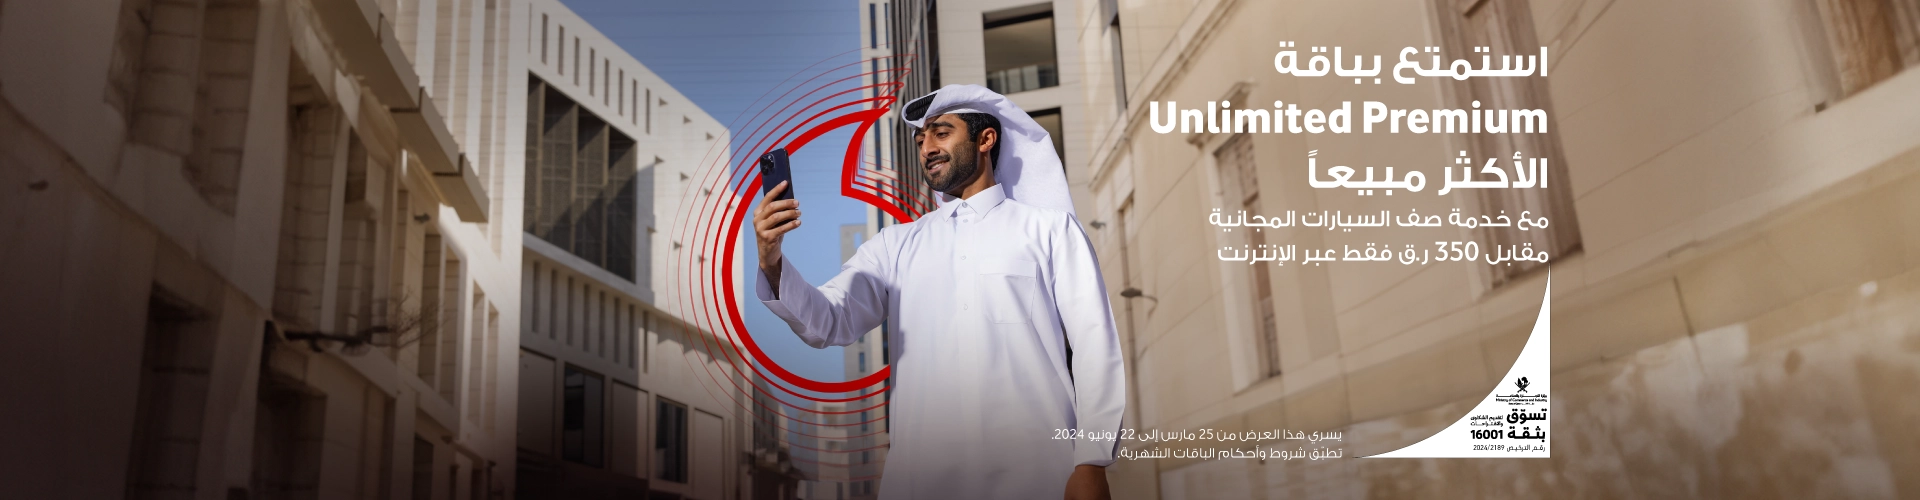 Experience enhanced unlimited Postpaid plans starting from QR 225